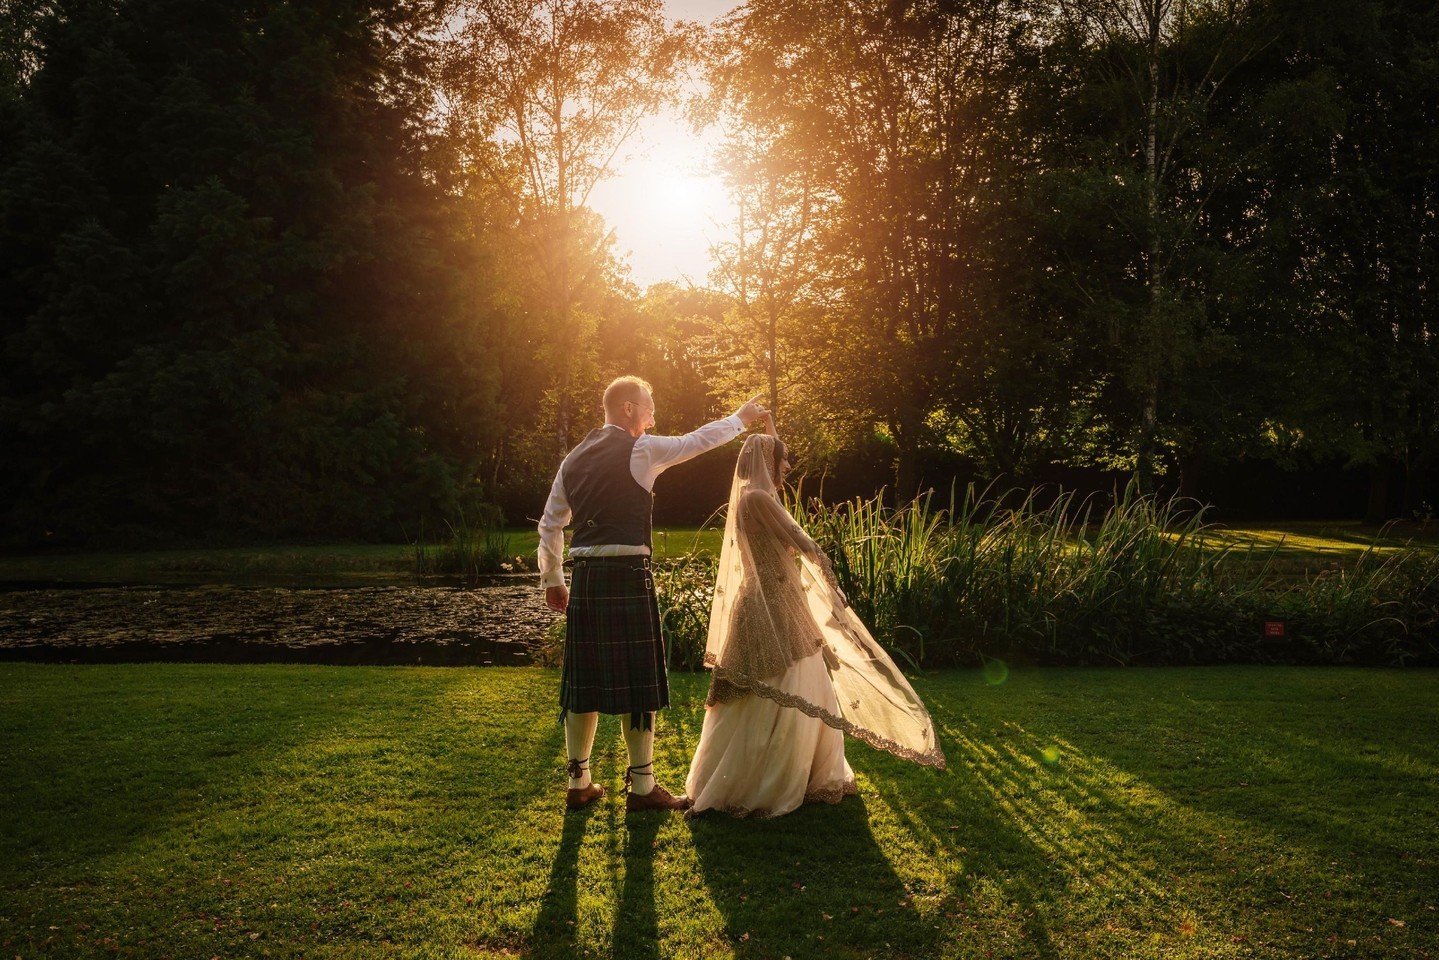 Its finally May and the warmer nights and golden hour is just perfect at this time of year as the sunsets by 9pm. This gives you time to enjoy your reception and then sneak out to captured it alone.

Captured by @zaradavisphoto

#watersedge #cotswold